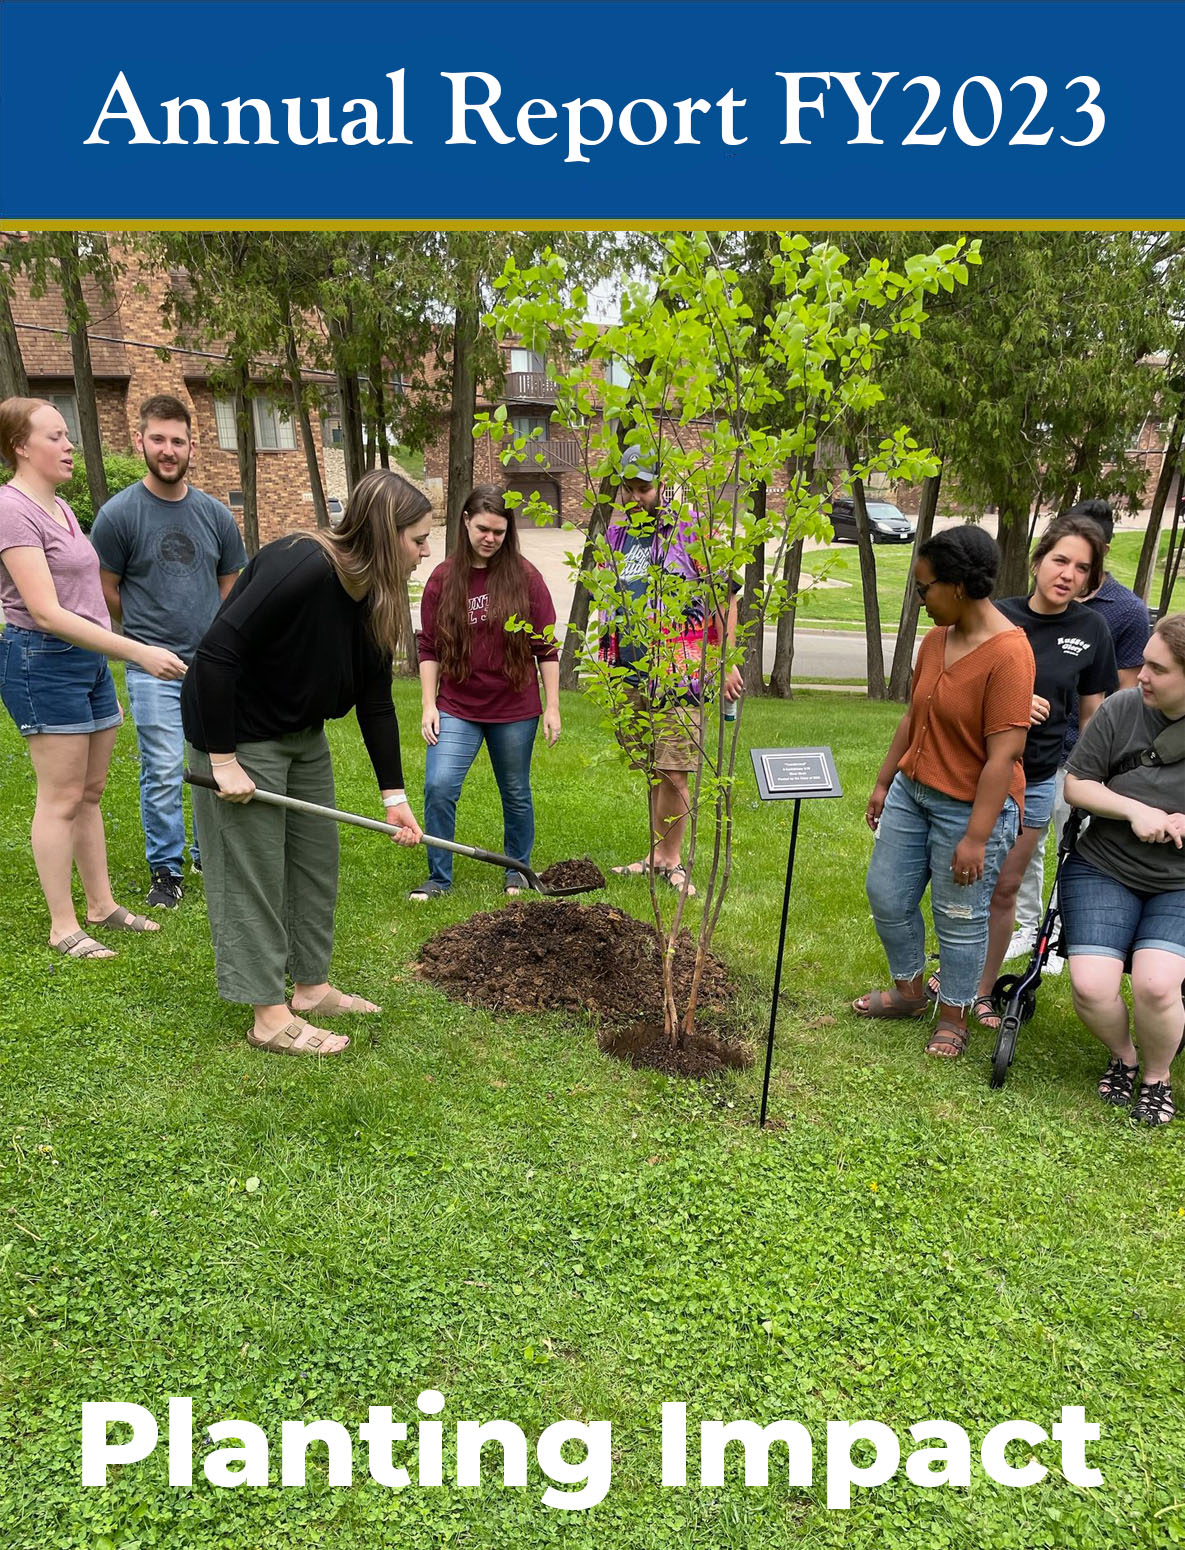 7 students planting a seedling tree